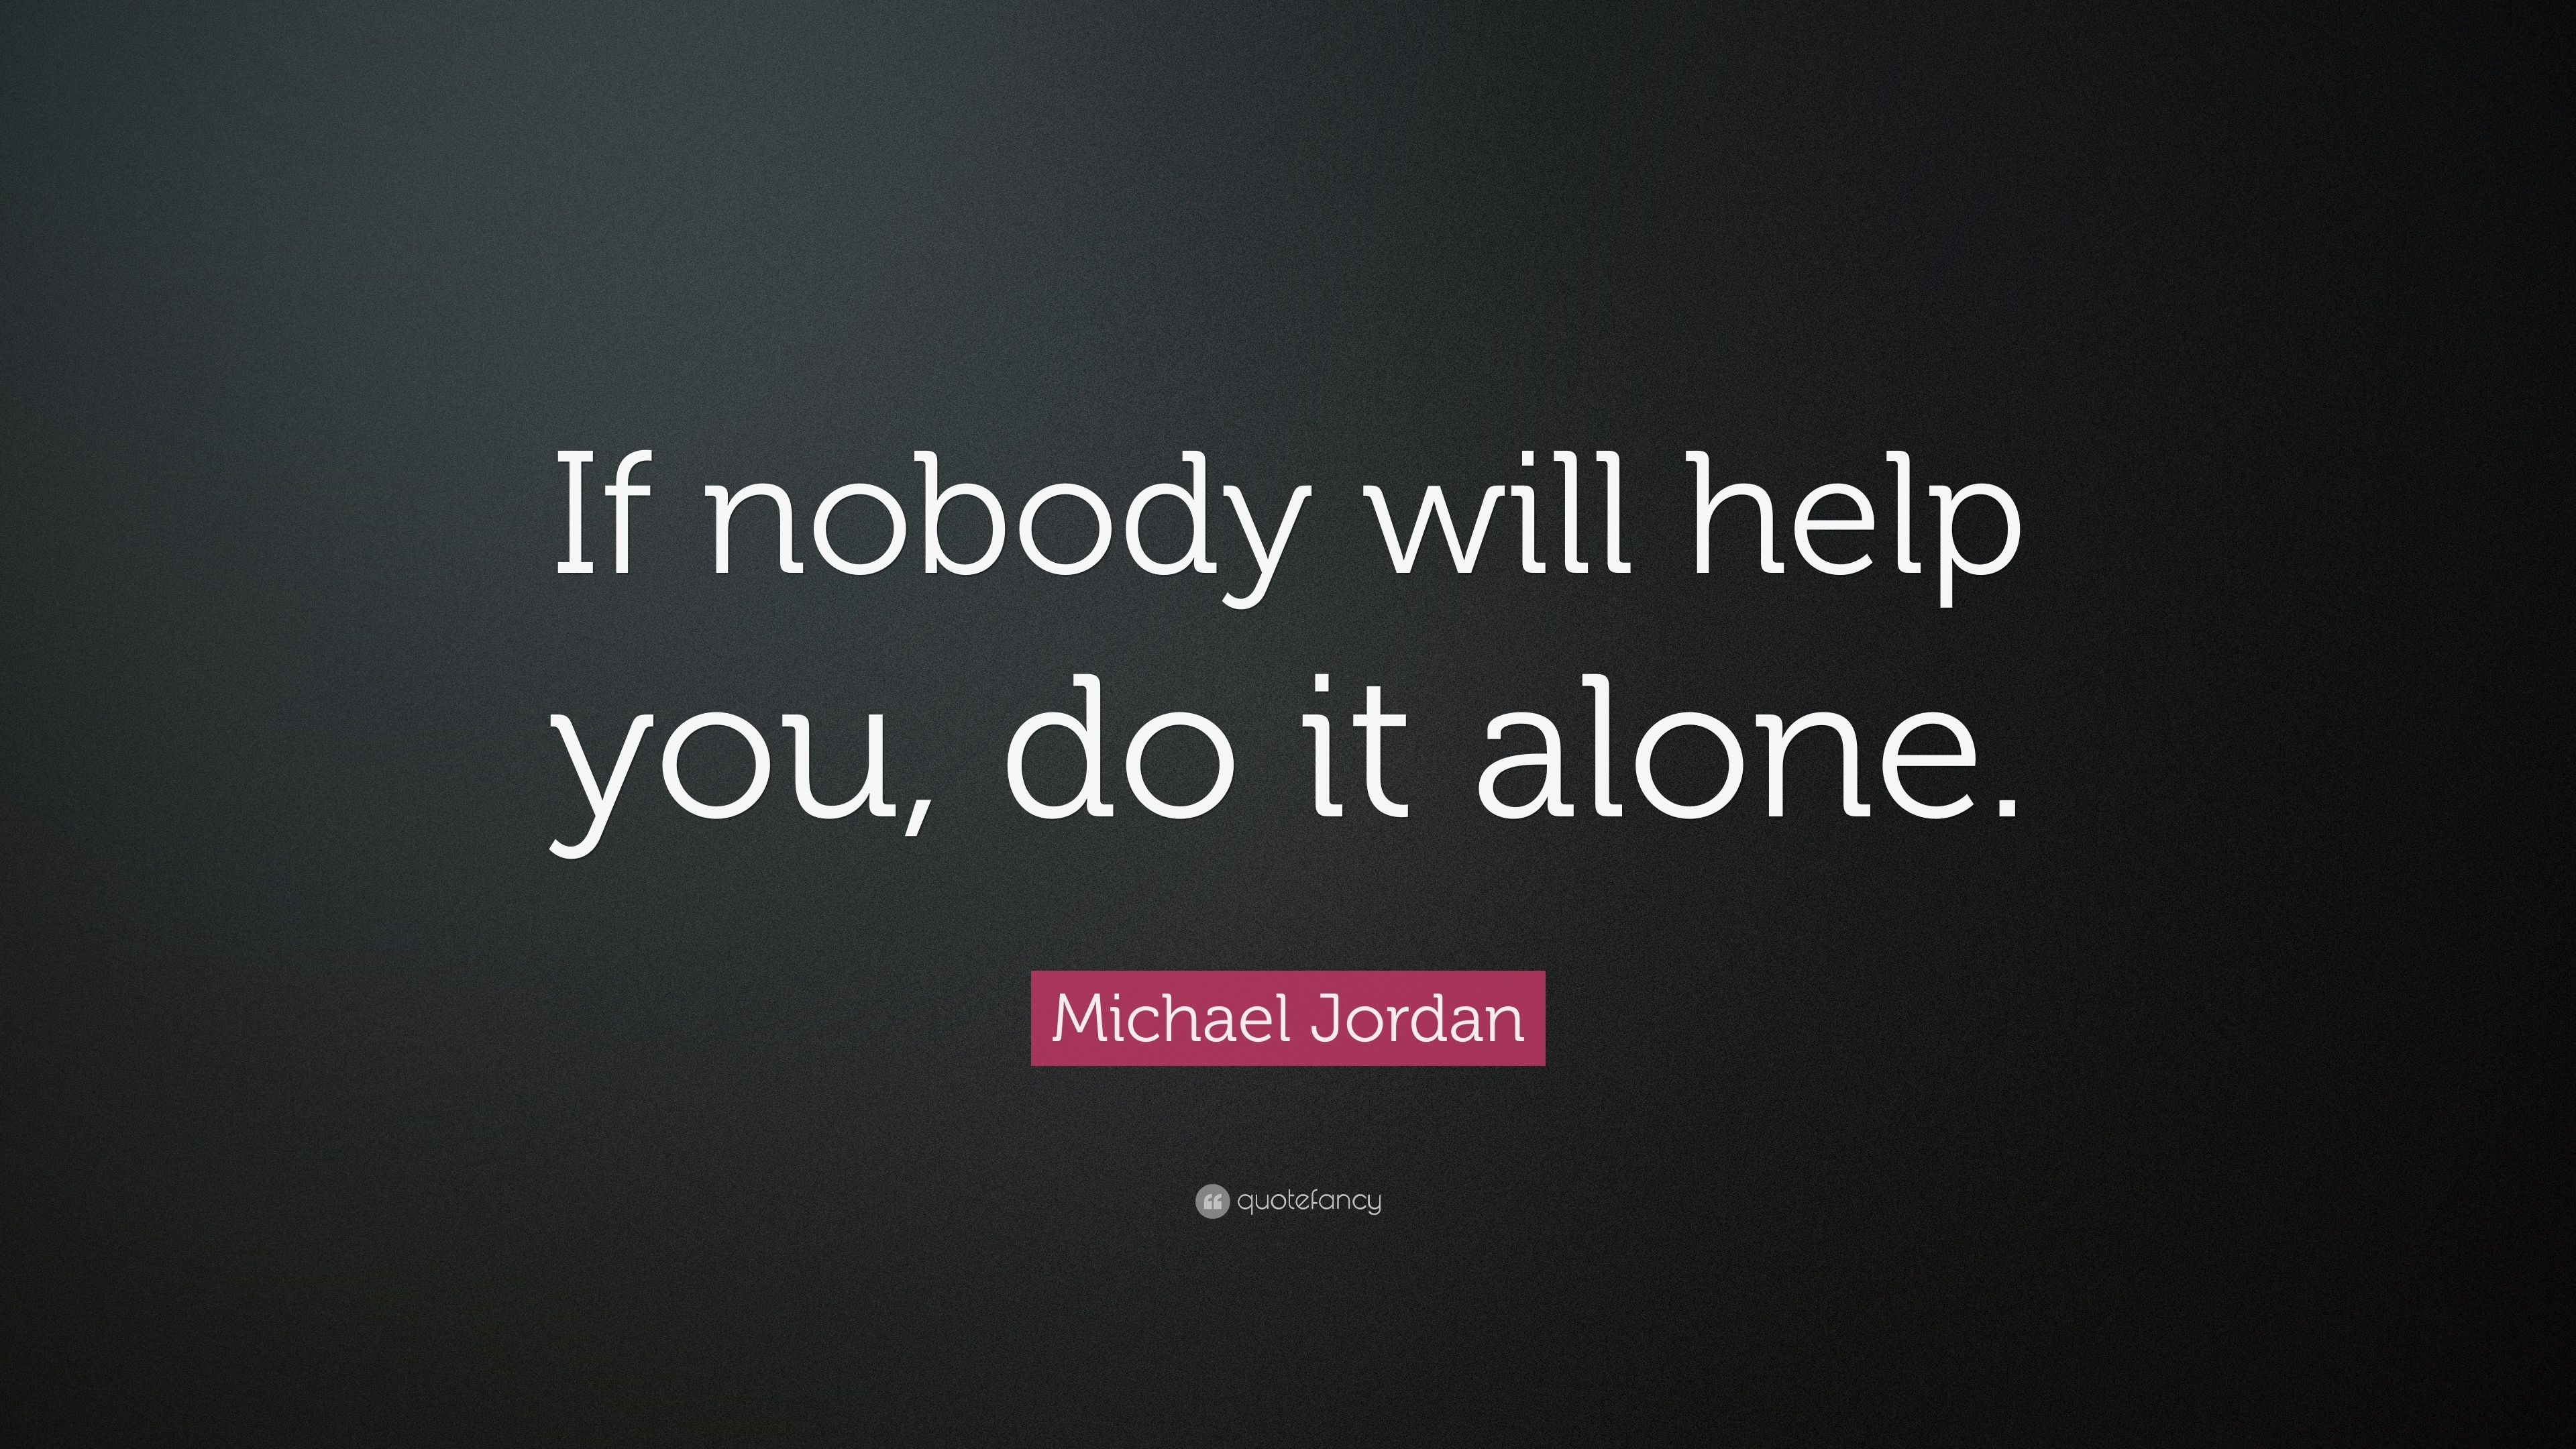 Michael Jordan Quote: “If nobody will help you, do it alone.” 16